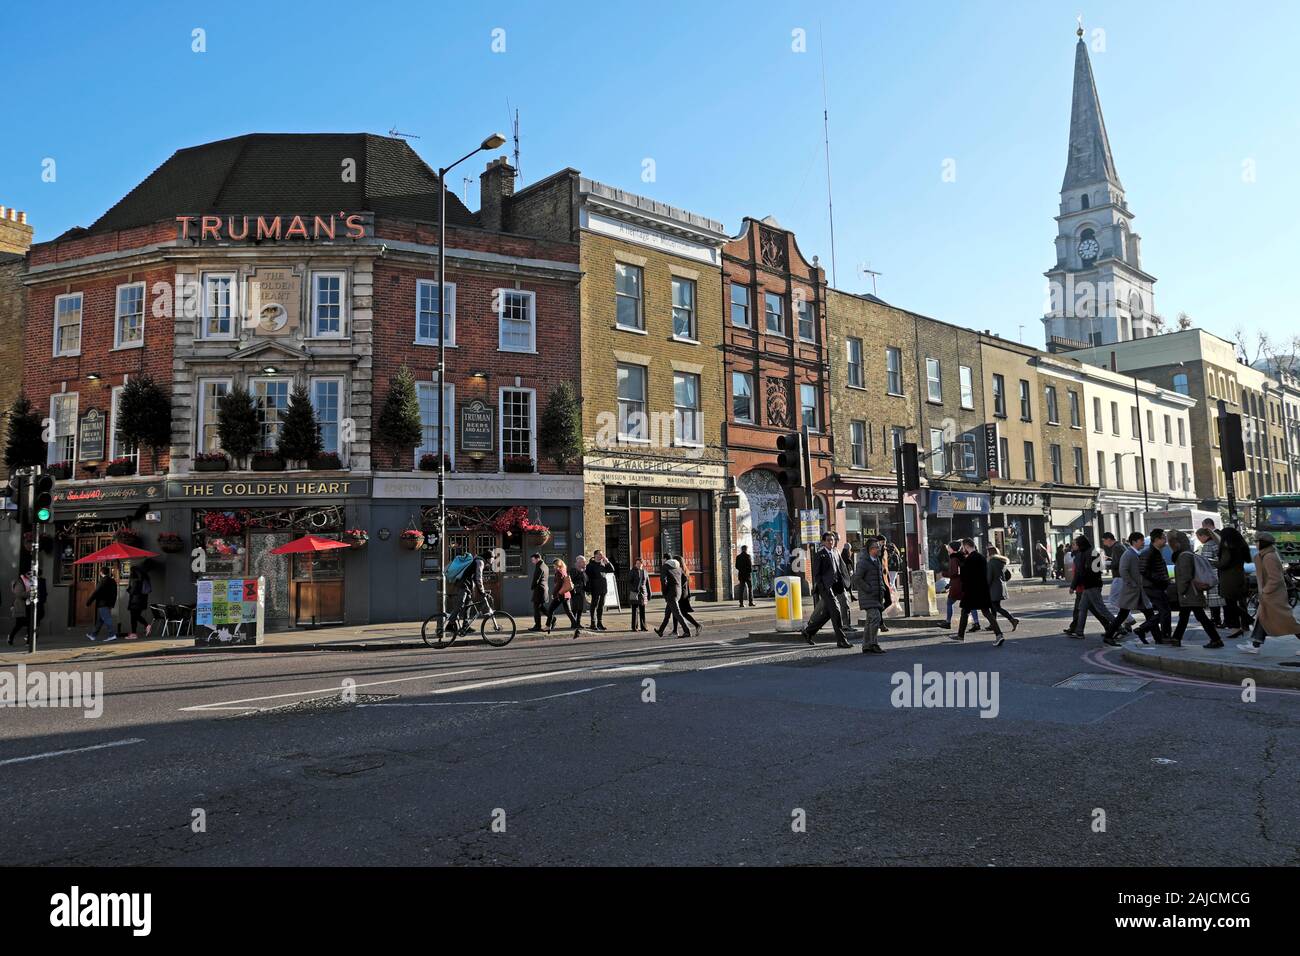 A view of Truman's pub, row terraced housing and Christ Church spire on Commercial Street in Spitalfields East London E1 England UK  KATHY DEWITT Stock Photo